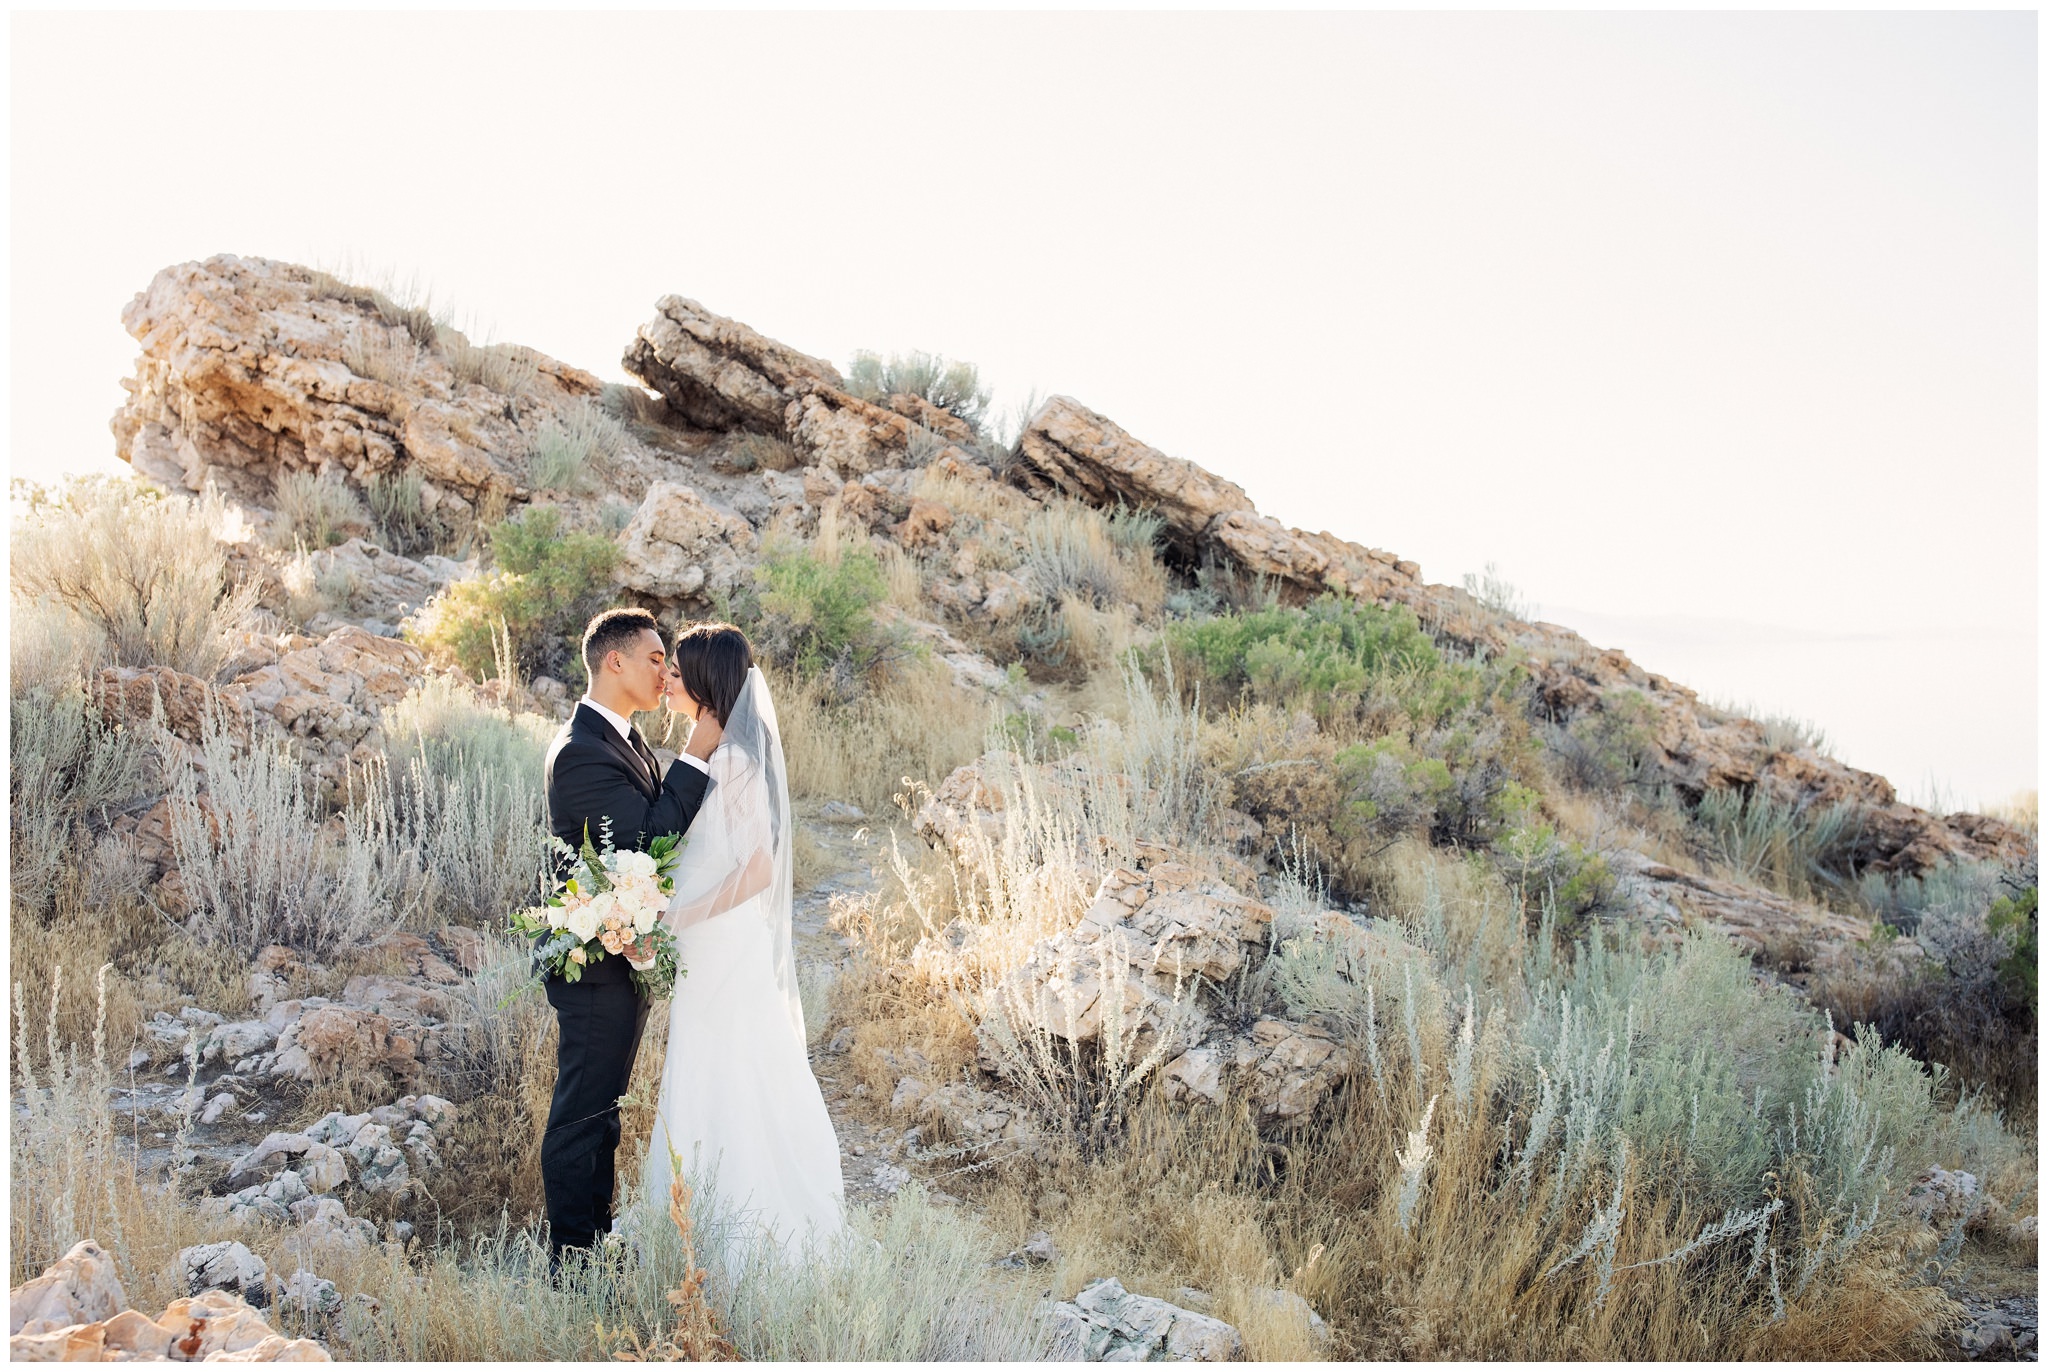 Antelope Island pictures of bride and groom near rocks and island